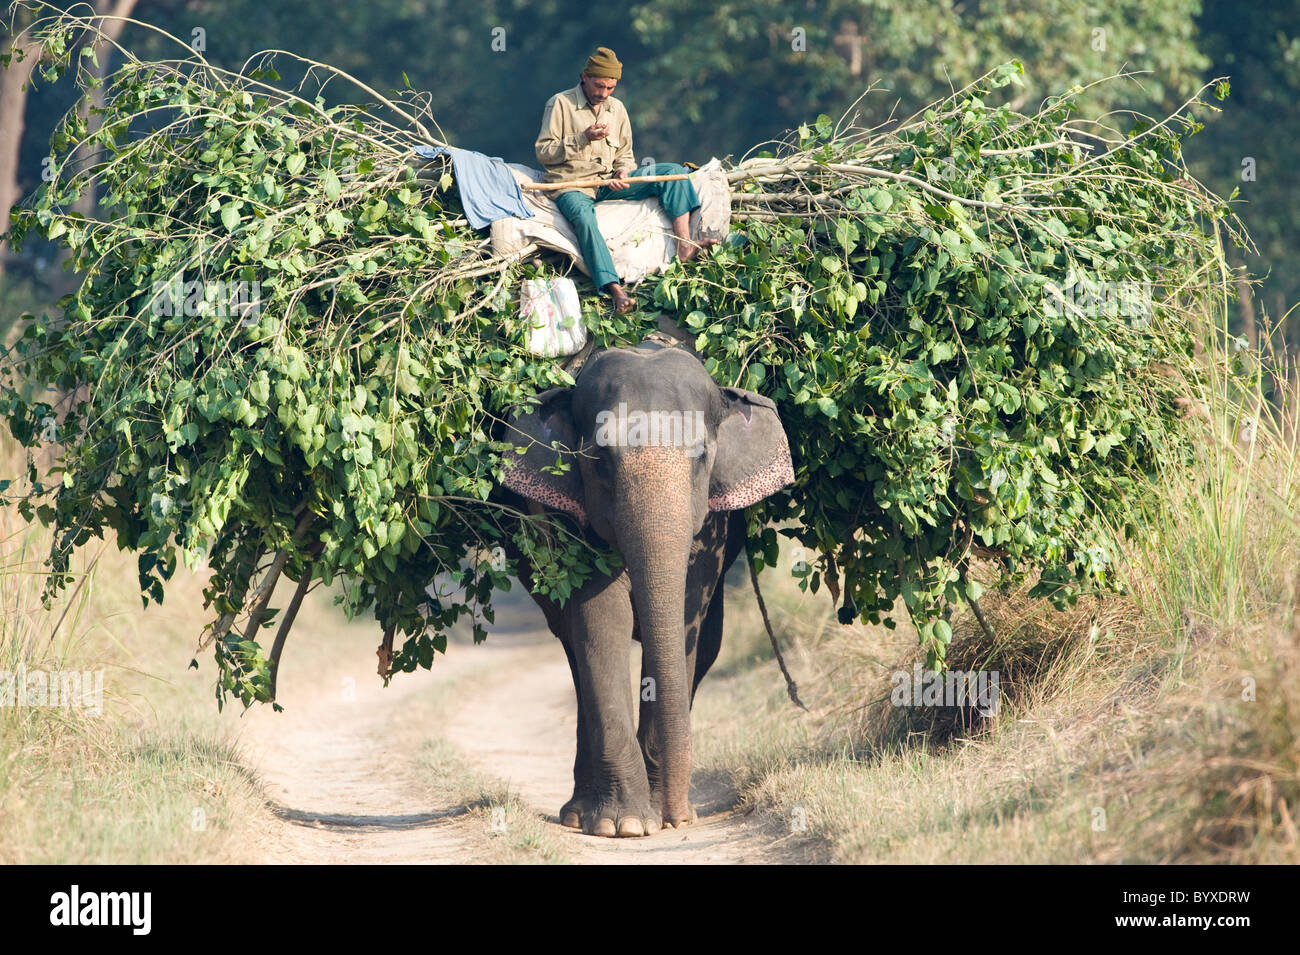 Mahout man riding elephant carrying branches India Stock Photo